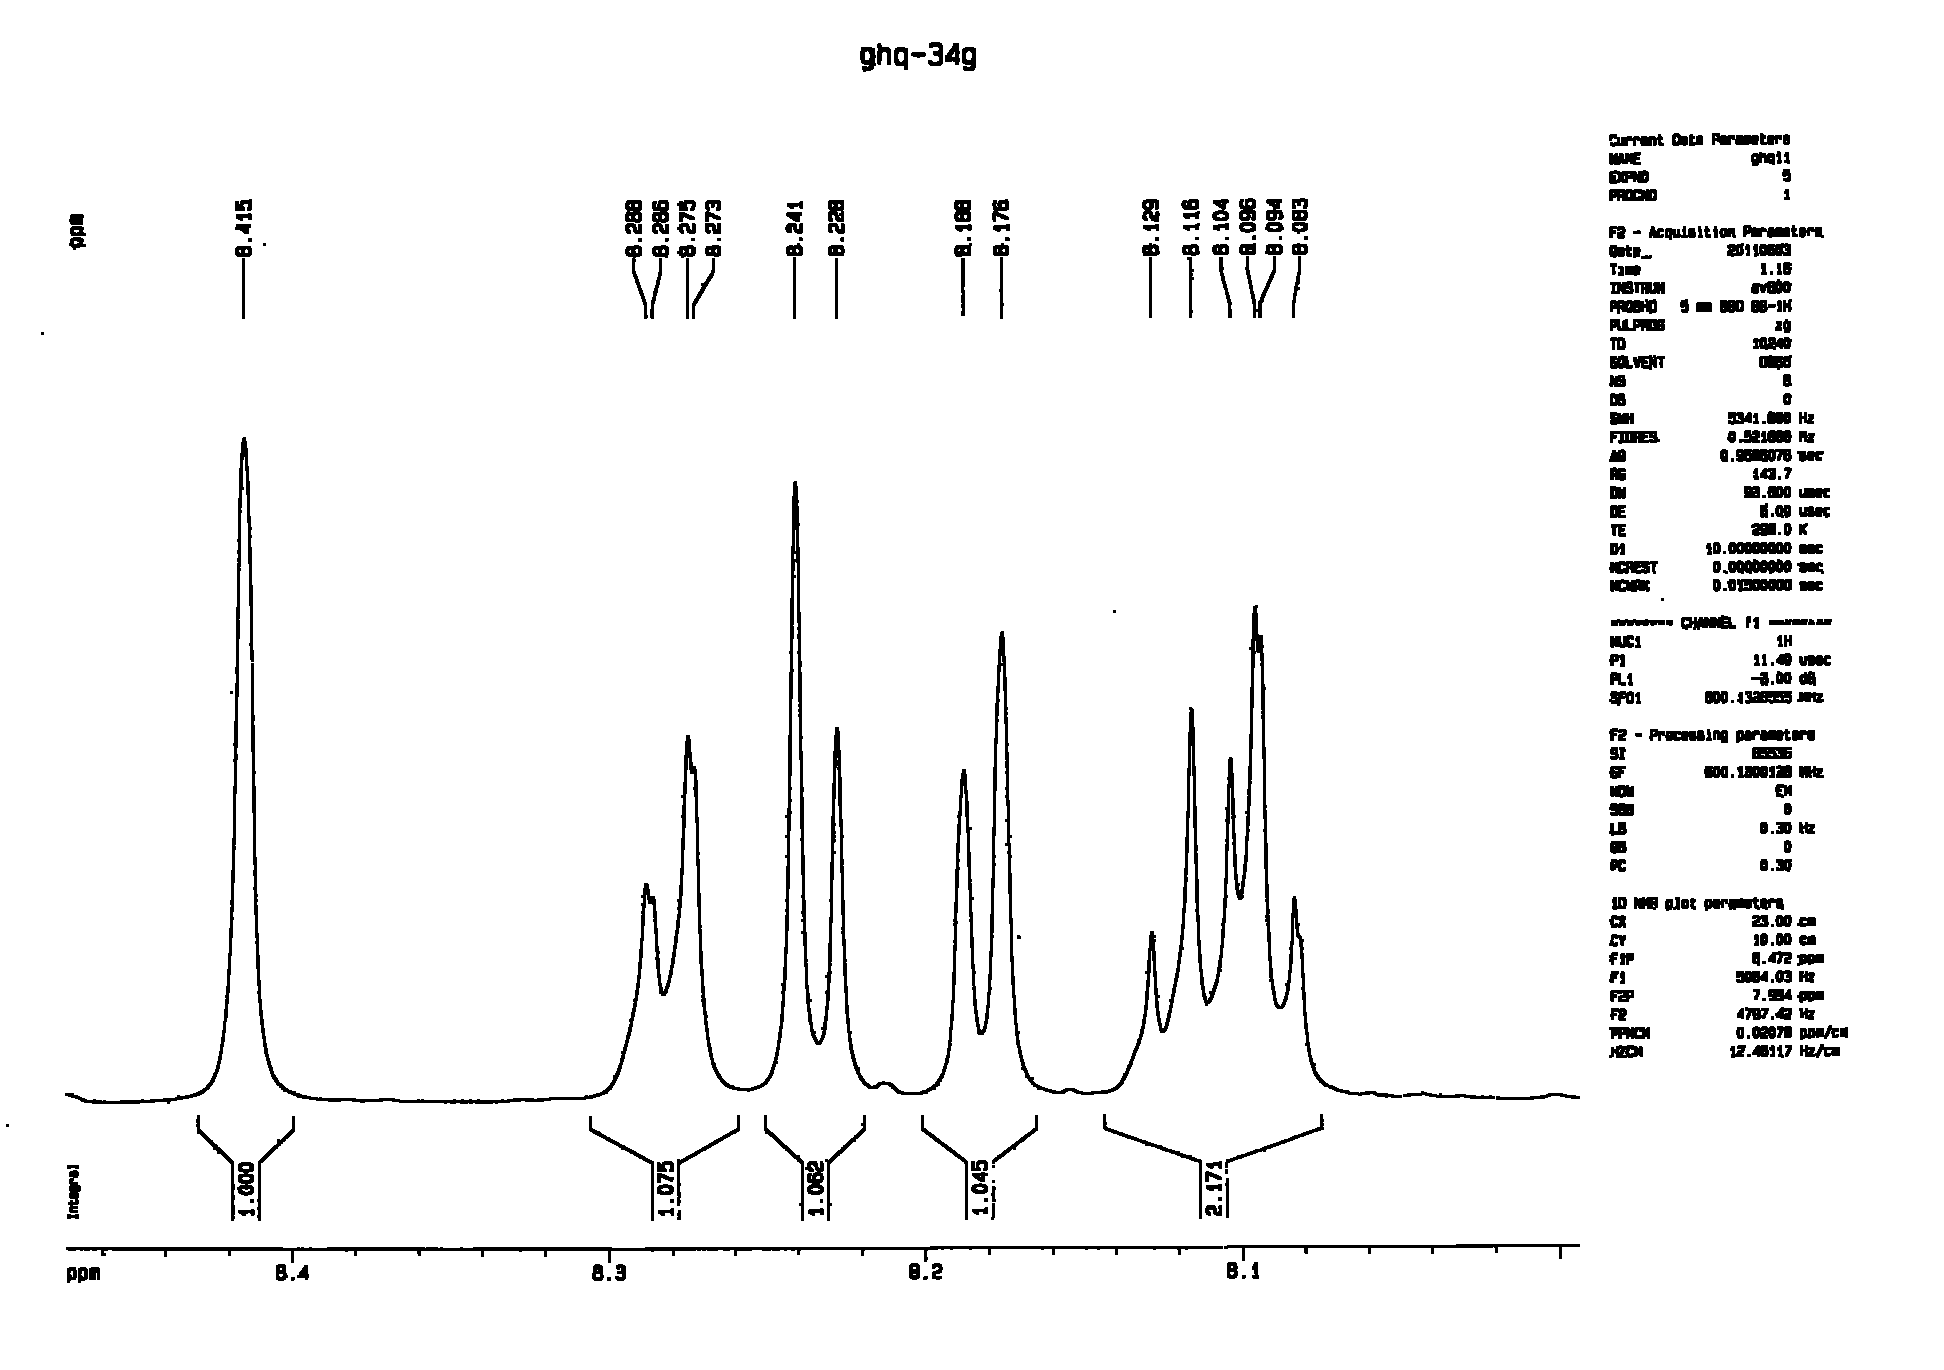 Method for preparing biphenyltetracarboxylic dianhydride (BPDA)